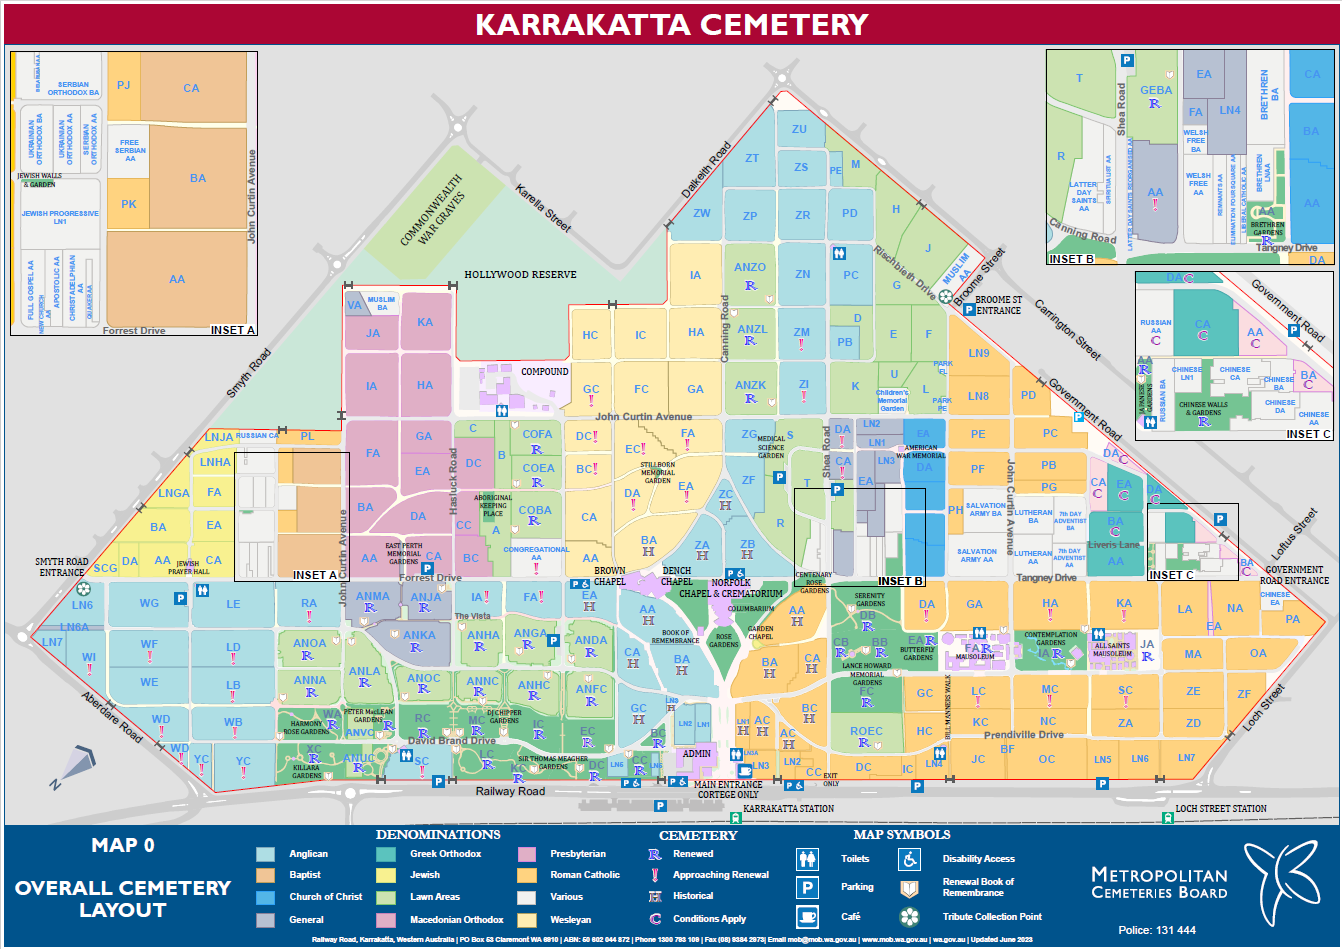 Karrakatta Cemetery overall map showing each section of the cemetery